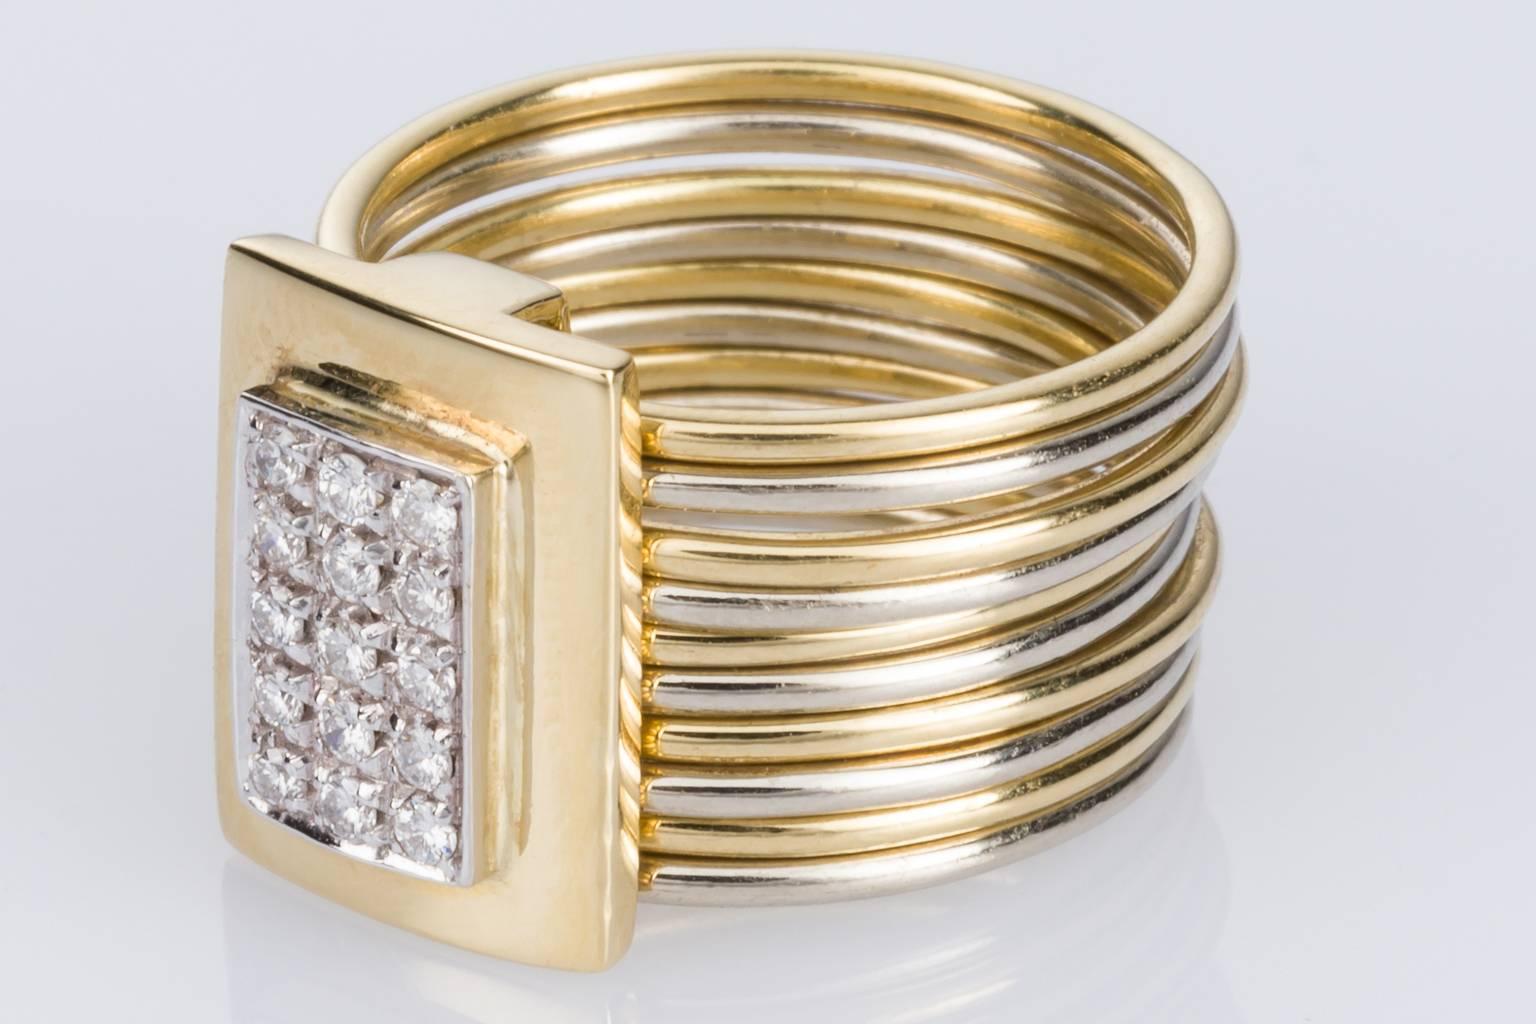 A stunning Damiani Multi Band ring consisting of 10 individual rounded bands alternating between white & yellow gold and each one measuring 1.00 x 1.00mm, with an attached sliding rectangular feature piece set with 15 grain set diamonds. The modern